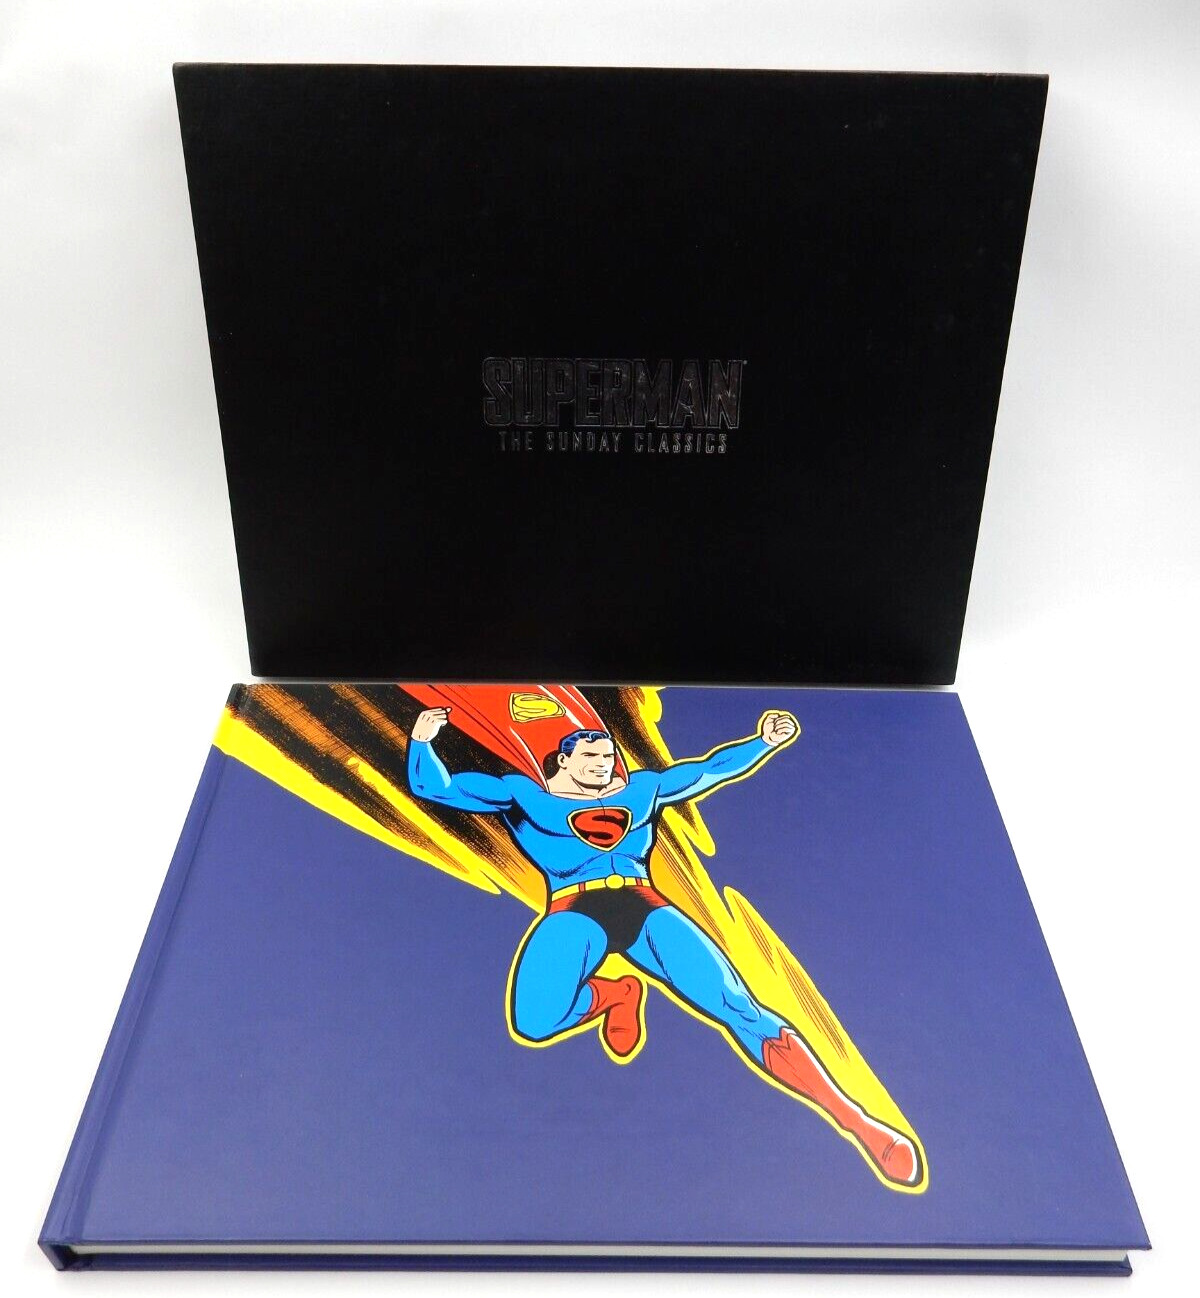 SUPERMAN: THE SUNDAY CLASSICS, 1939-1943 HARDCOVER WITH SLIPCASE KITCHEN SINK